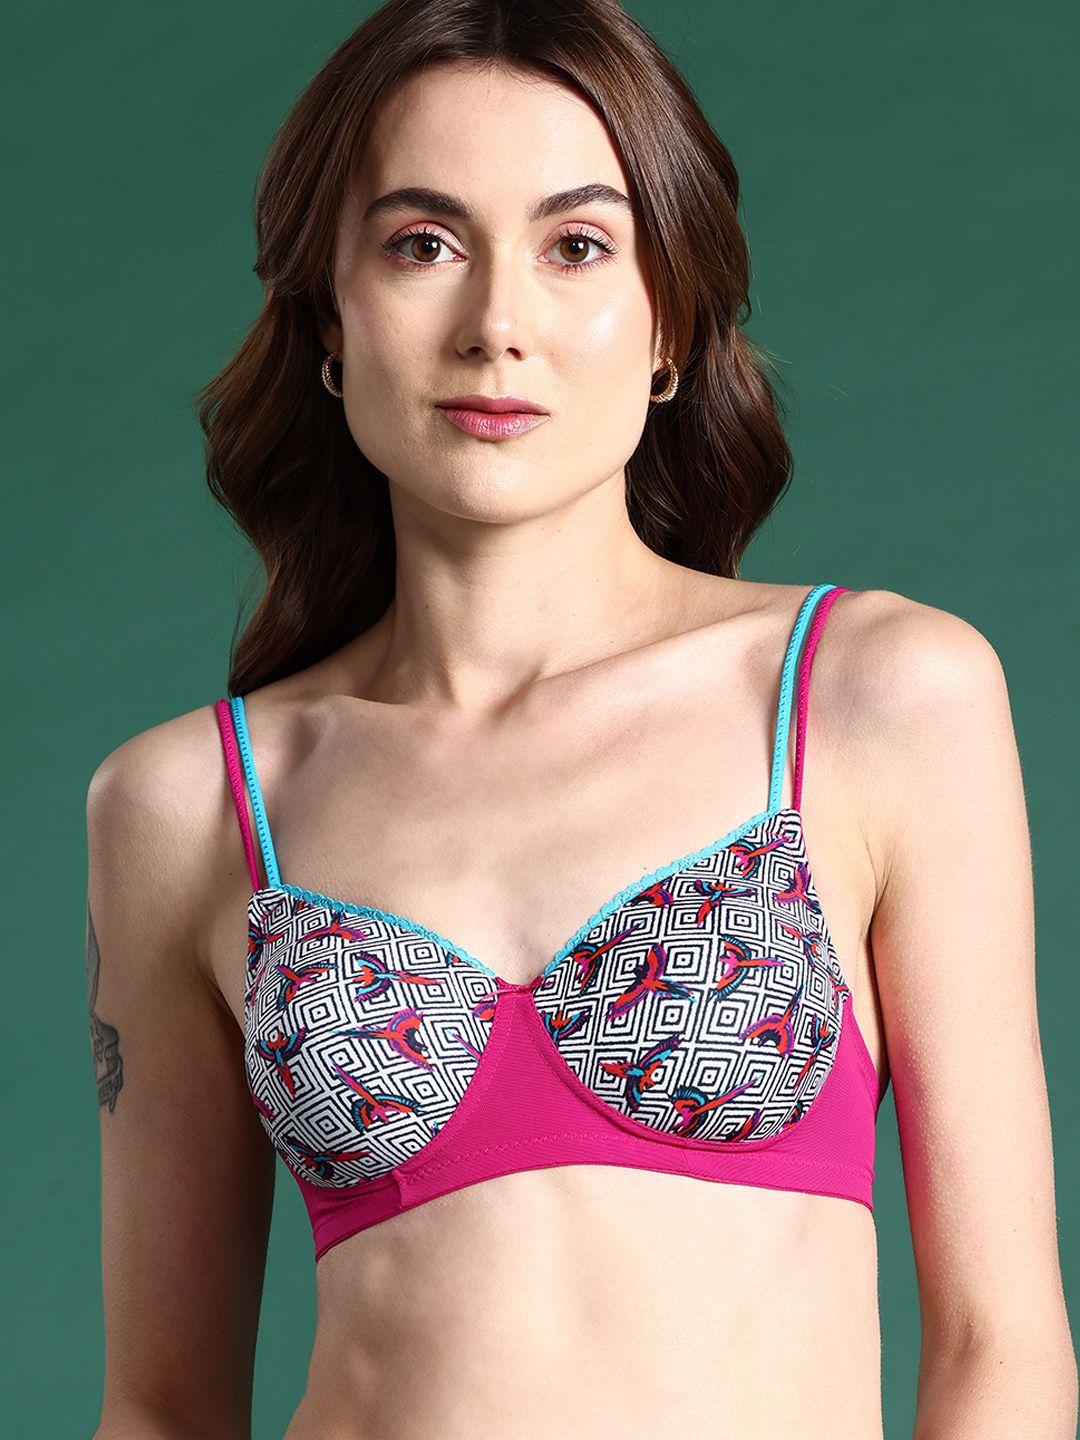 dressberry abstract printed bra - full coverage heavily padded 1166-pink